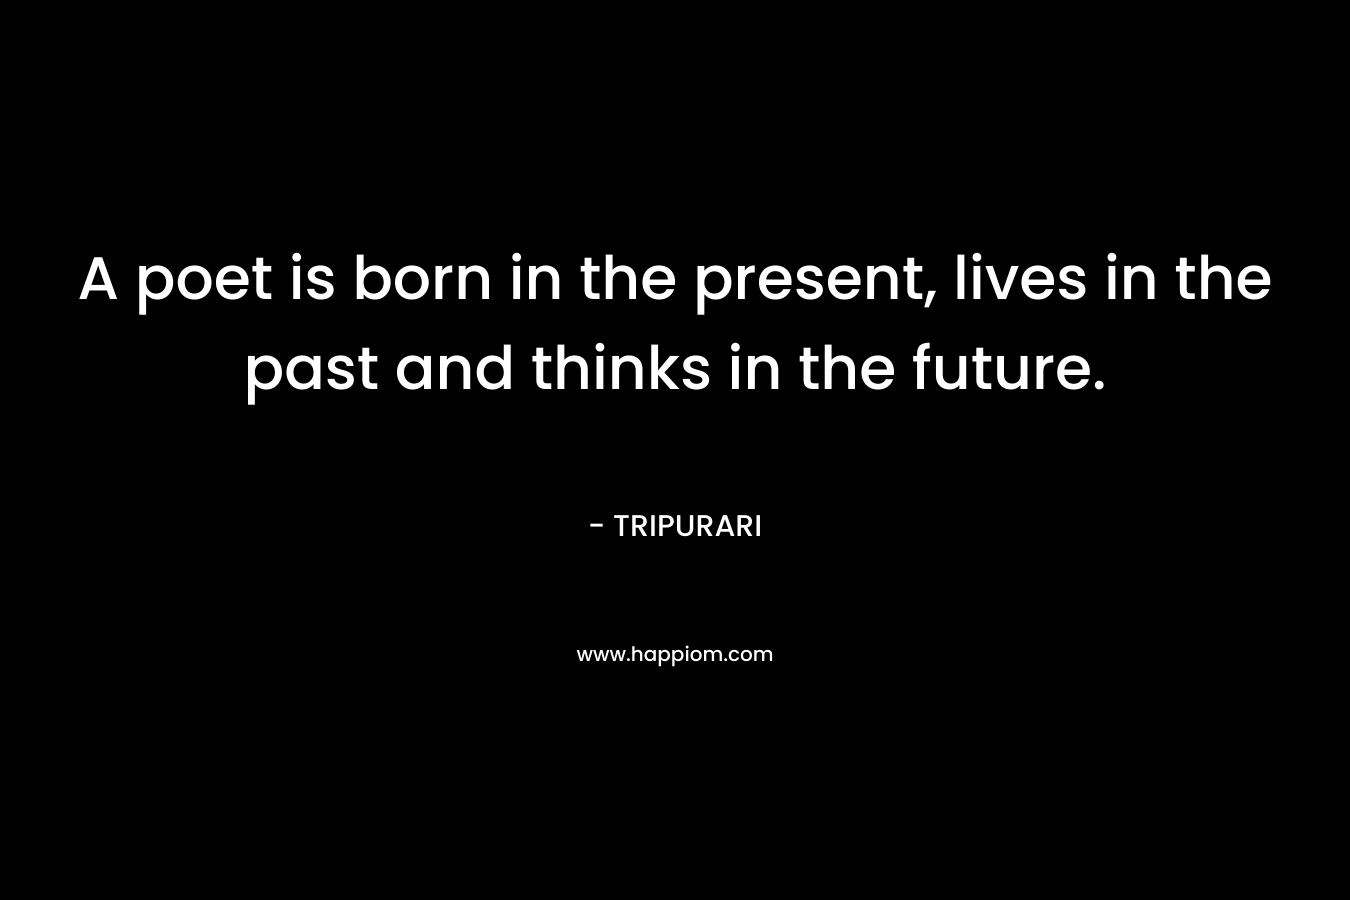 A poet is born in the present, lives in the past and thinks in the future.